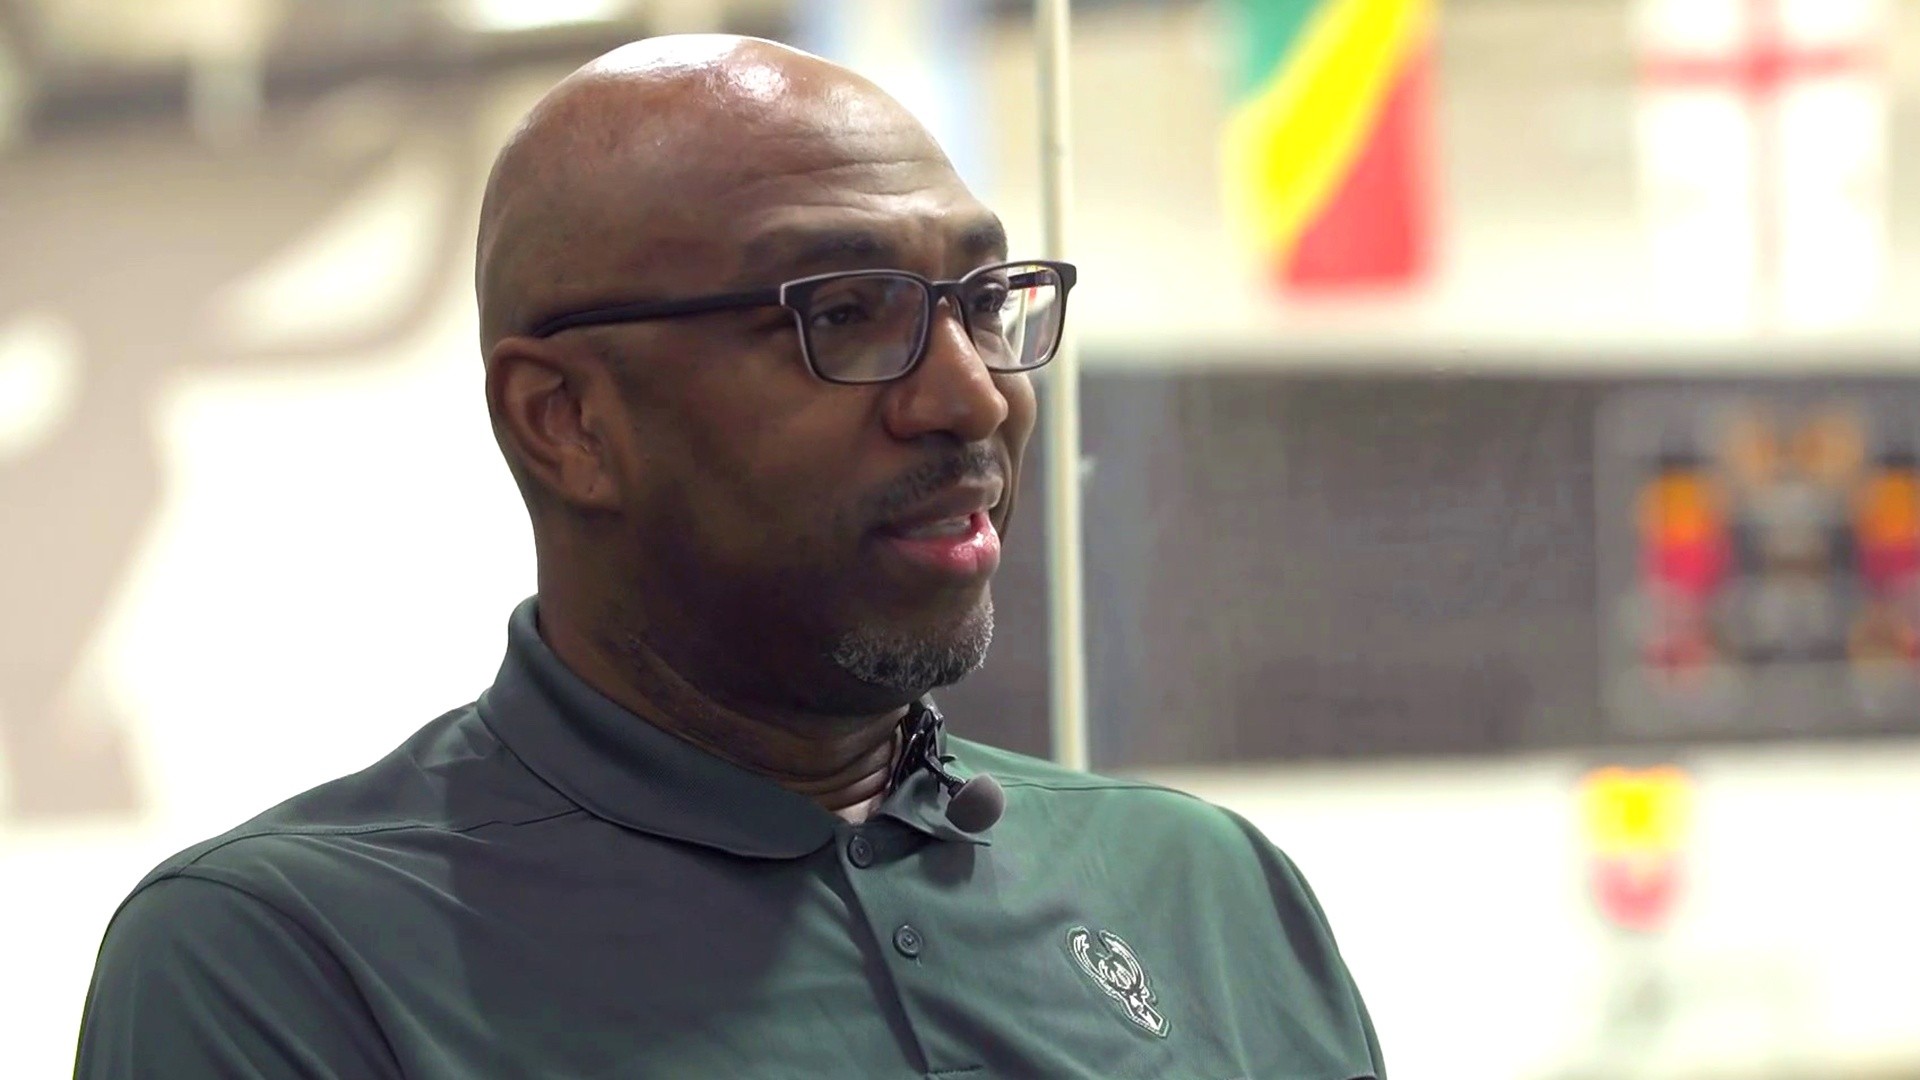 How former NBA player Vin Baker changed his life with sobriety